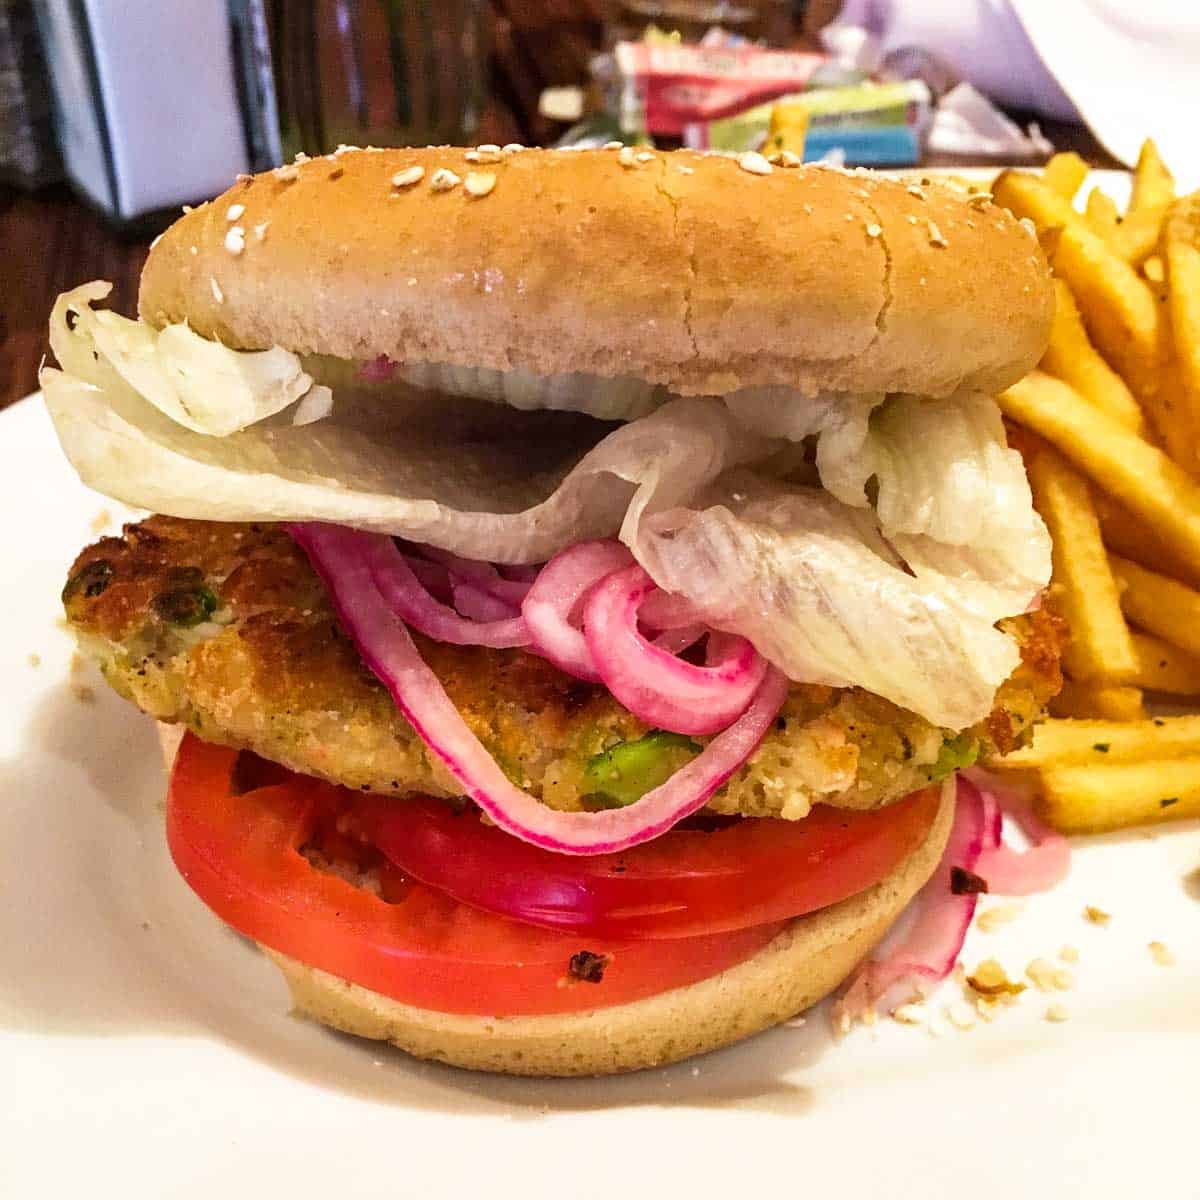 Front view of a veggie burger topped with tomatoes, red onions and lettuce with fries